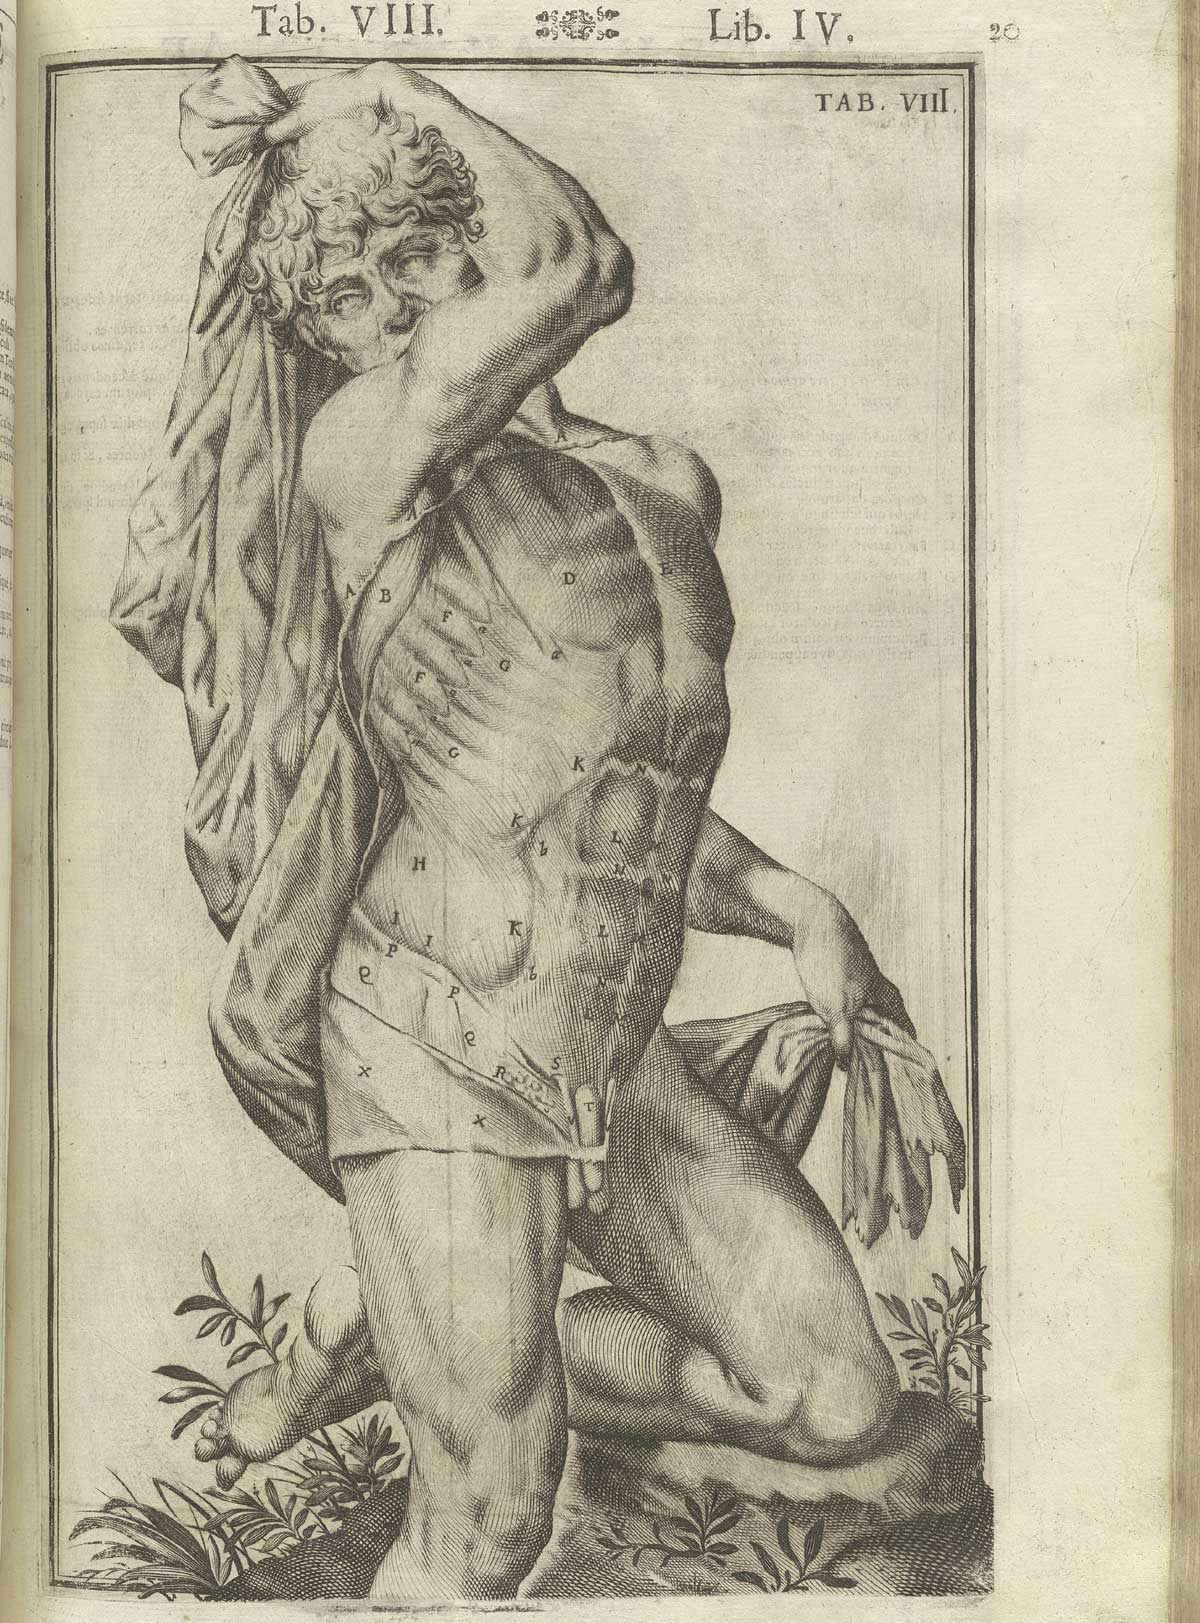 Engraving showing a nude male anatomical figure facing forward and to the right with flayed chest and abdomen revealing musculature beneath; the figure’s right arm is wrapped around his head draping a sheet behind him in a provocative fashion, and his left knee is bent and leaning on a tree stump; from Adriaan van de Spiegel and Giulio Cassieri’s De humani corporis fabrica libri decem, Venice, 1627, NLM call no. WZ 250 S755dh 1627.